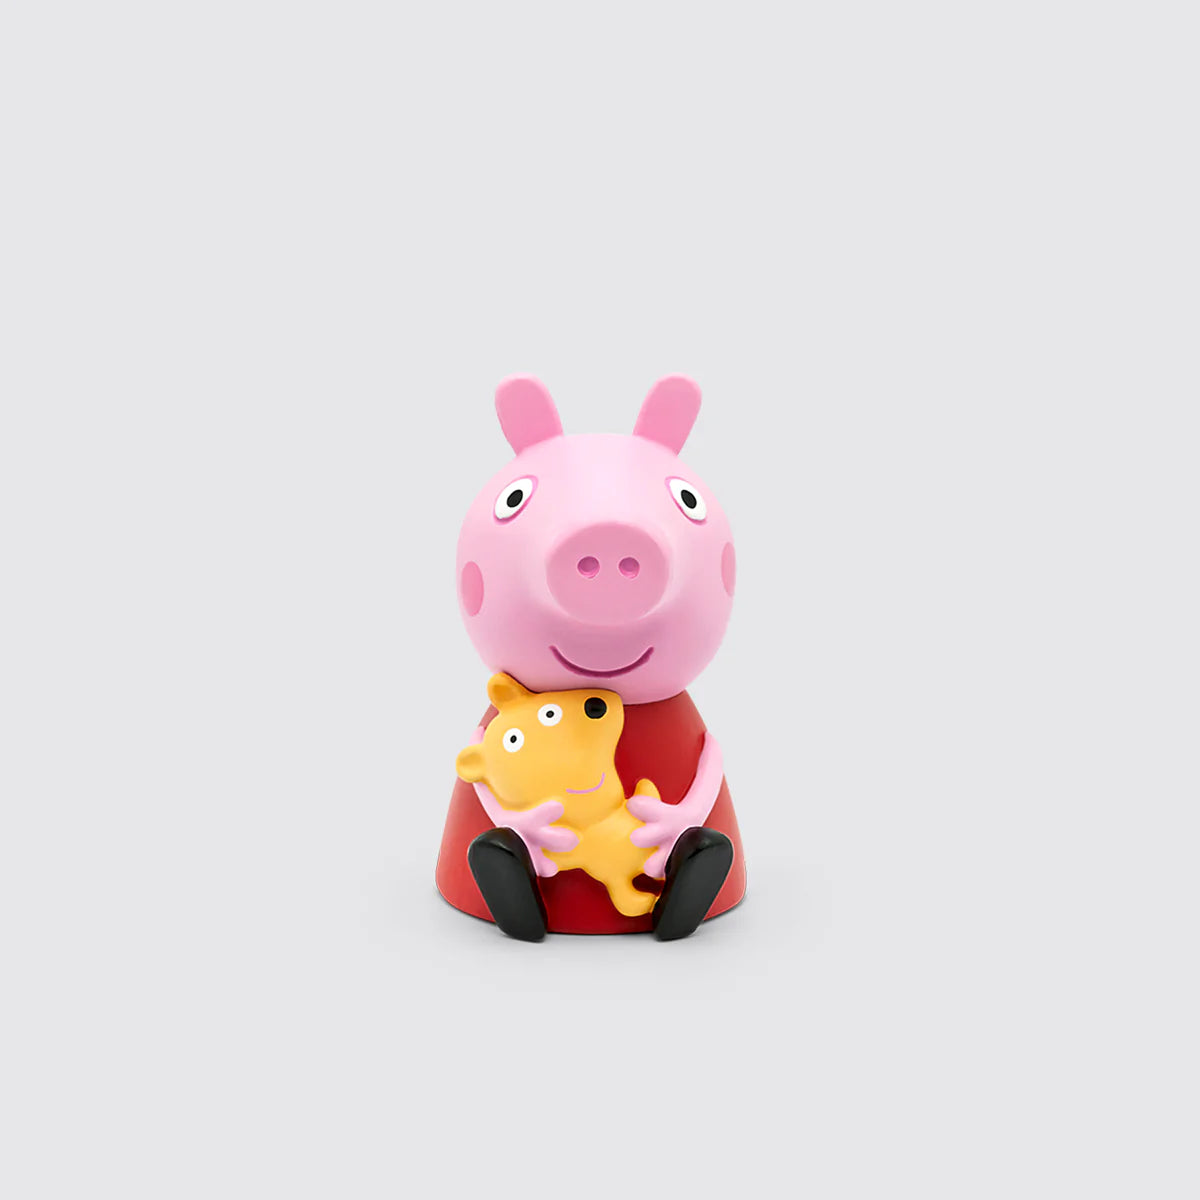 Peppa Pig: On The Road With Peppa by Tonies #10000543